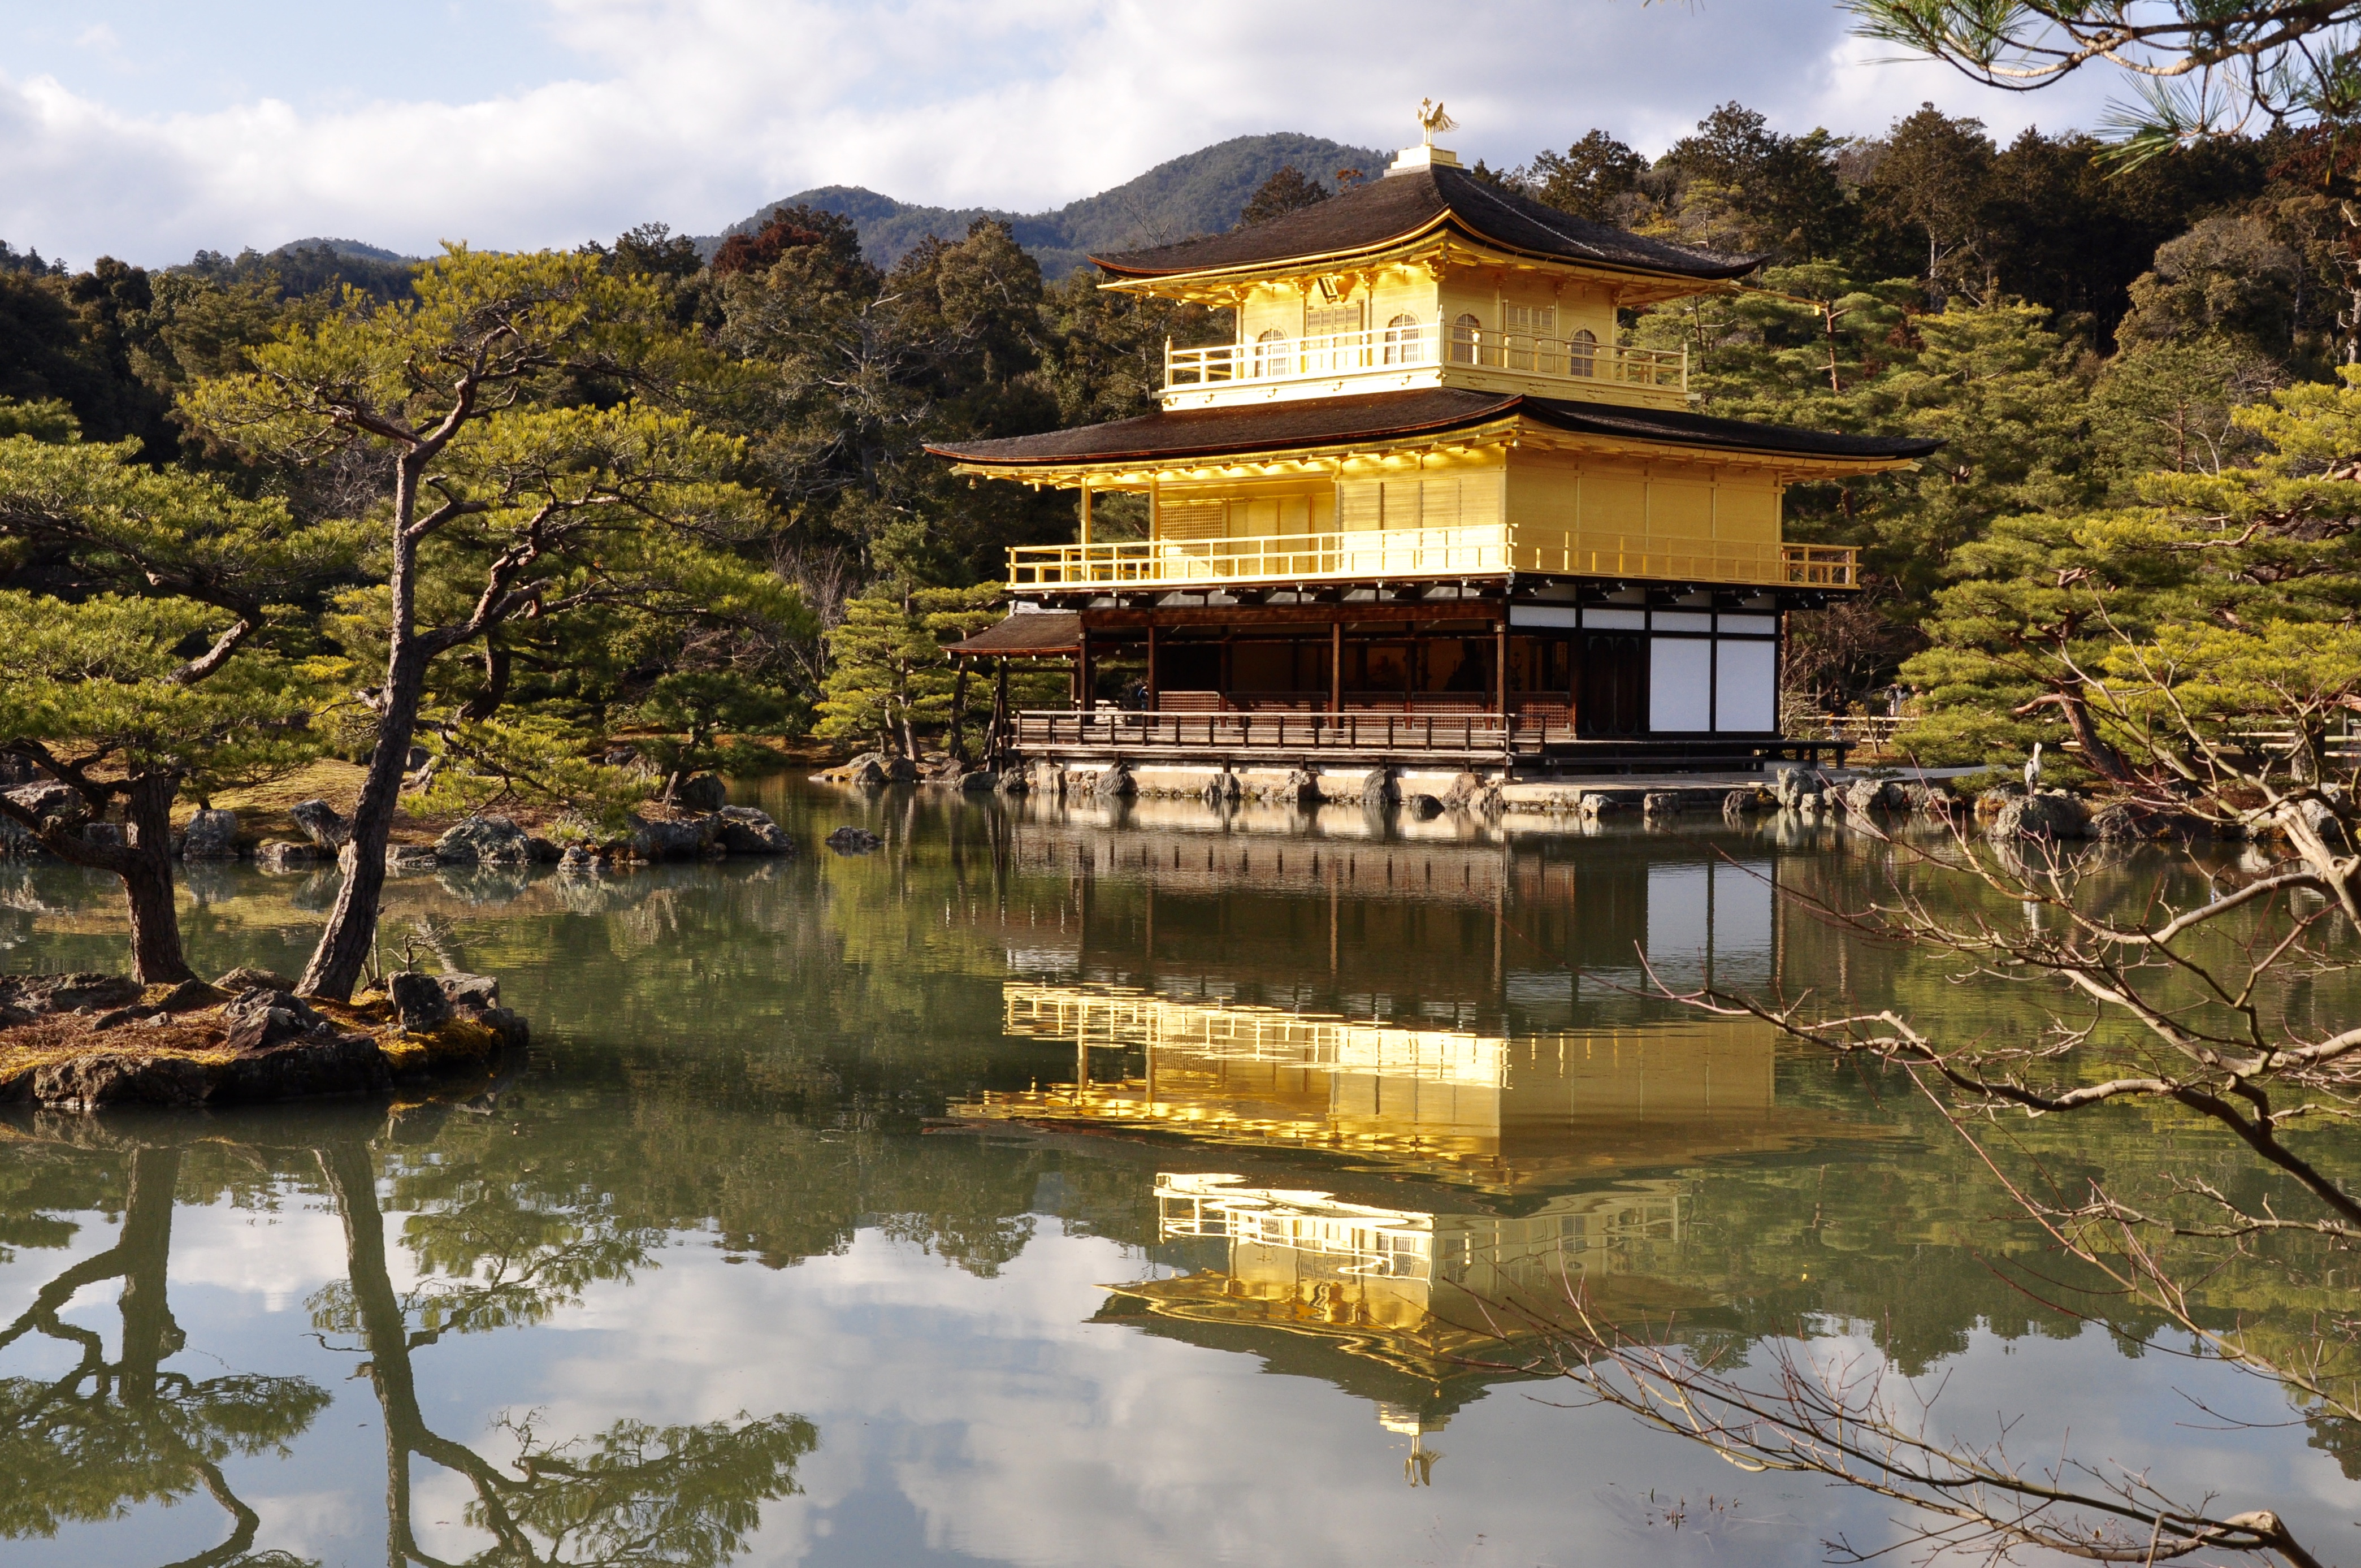 The Golden Pavilion is even more stunning in the sun!